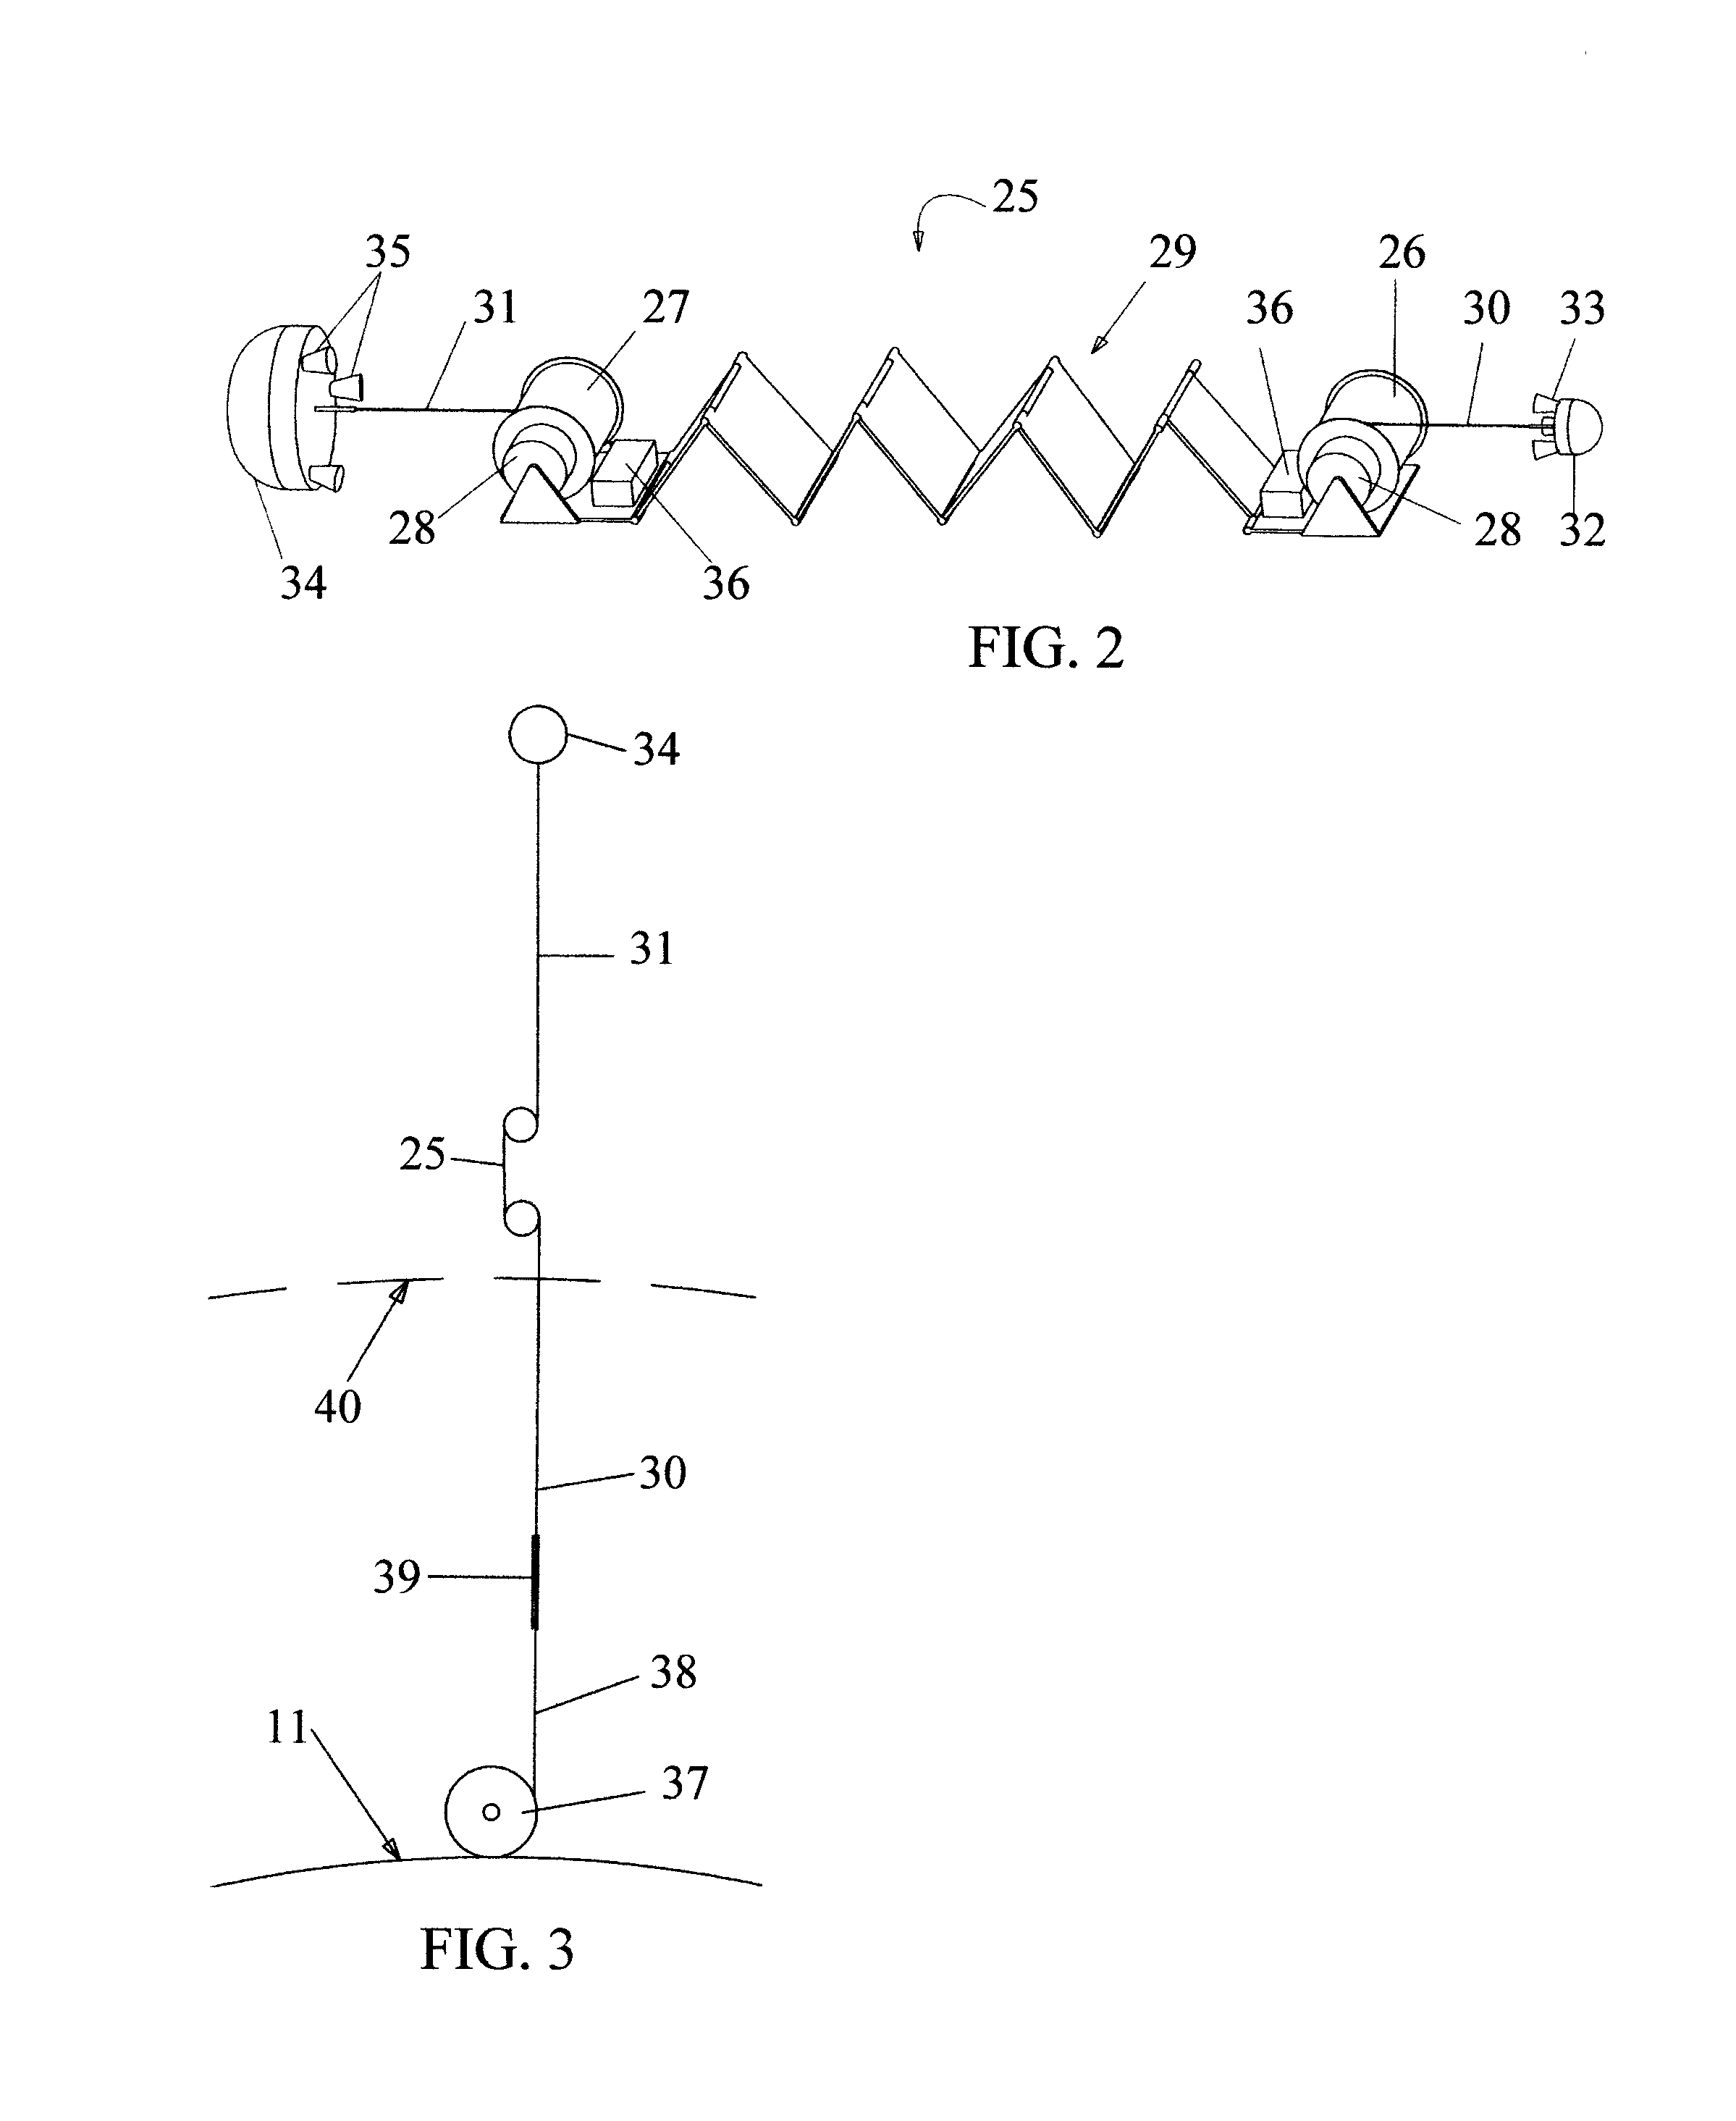 Method and Apparatus of Space Elevators